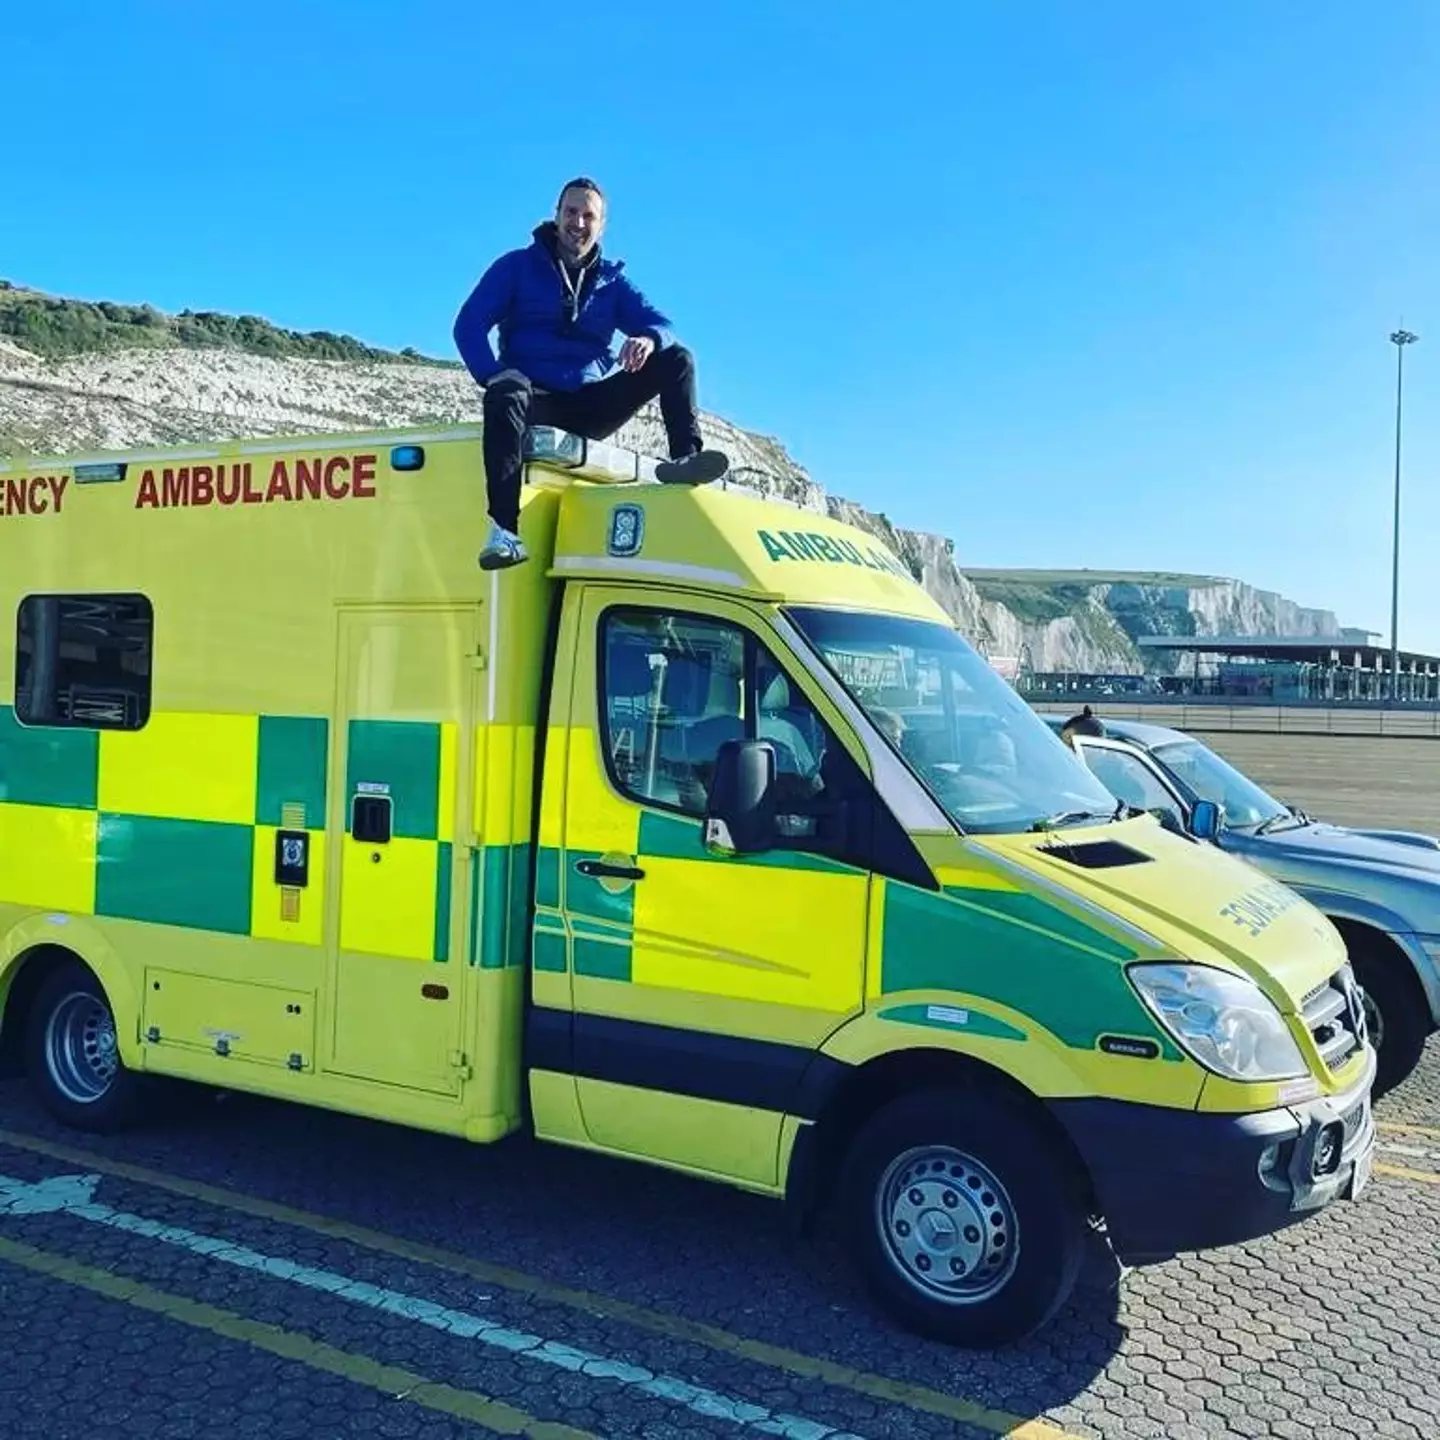 Dr Aled Jones drove the third ambulance from Wales through to Ukraine.